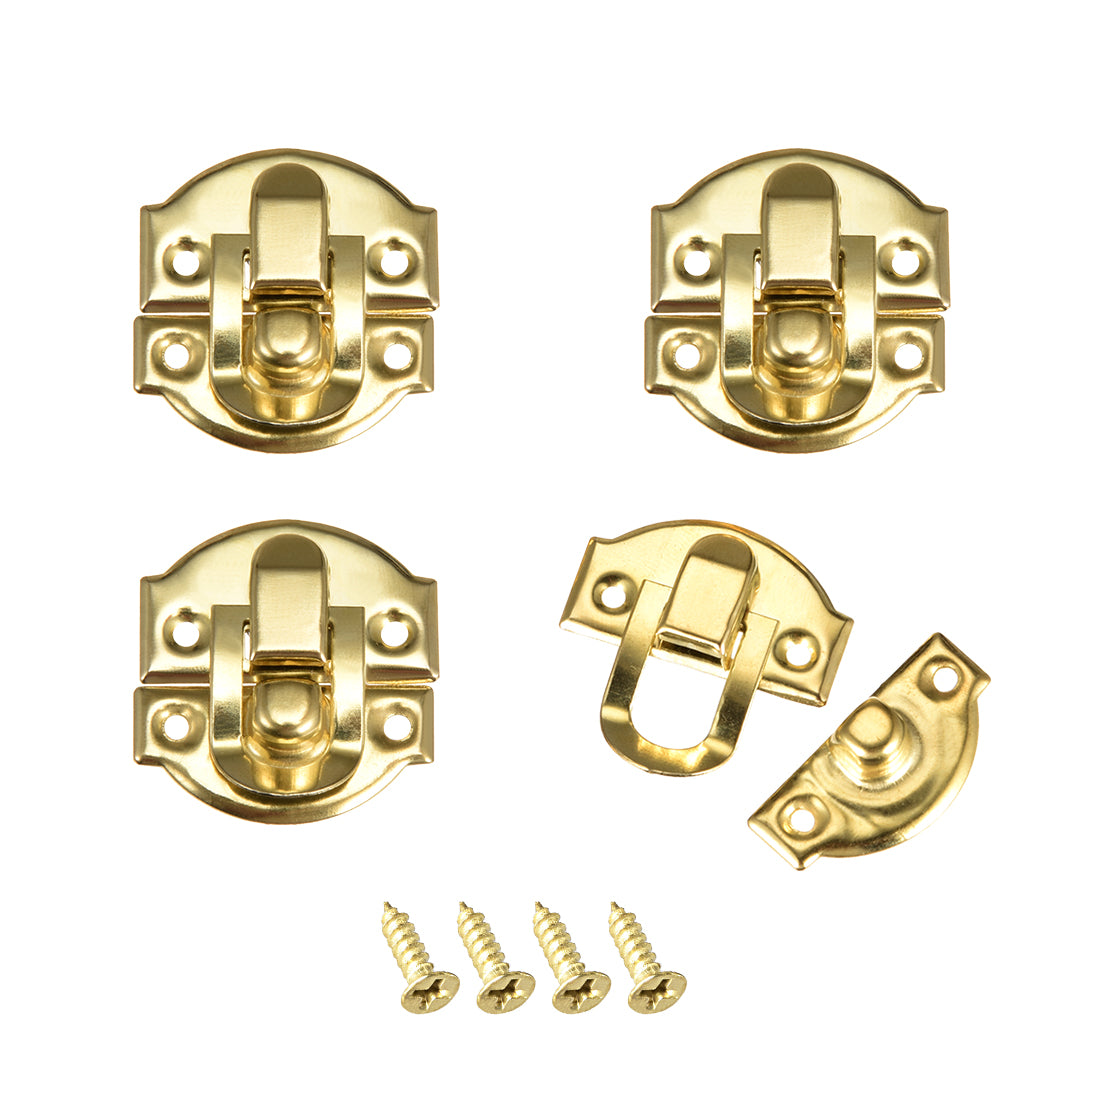 uxcell Uxcell Box Latch, Retro Style Small Size Golden Decorative Hasp Jewelry cases Catch w Screws 4 pcs